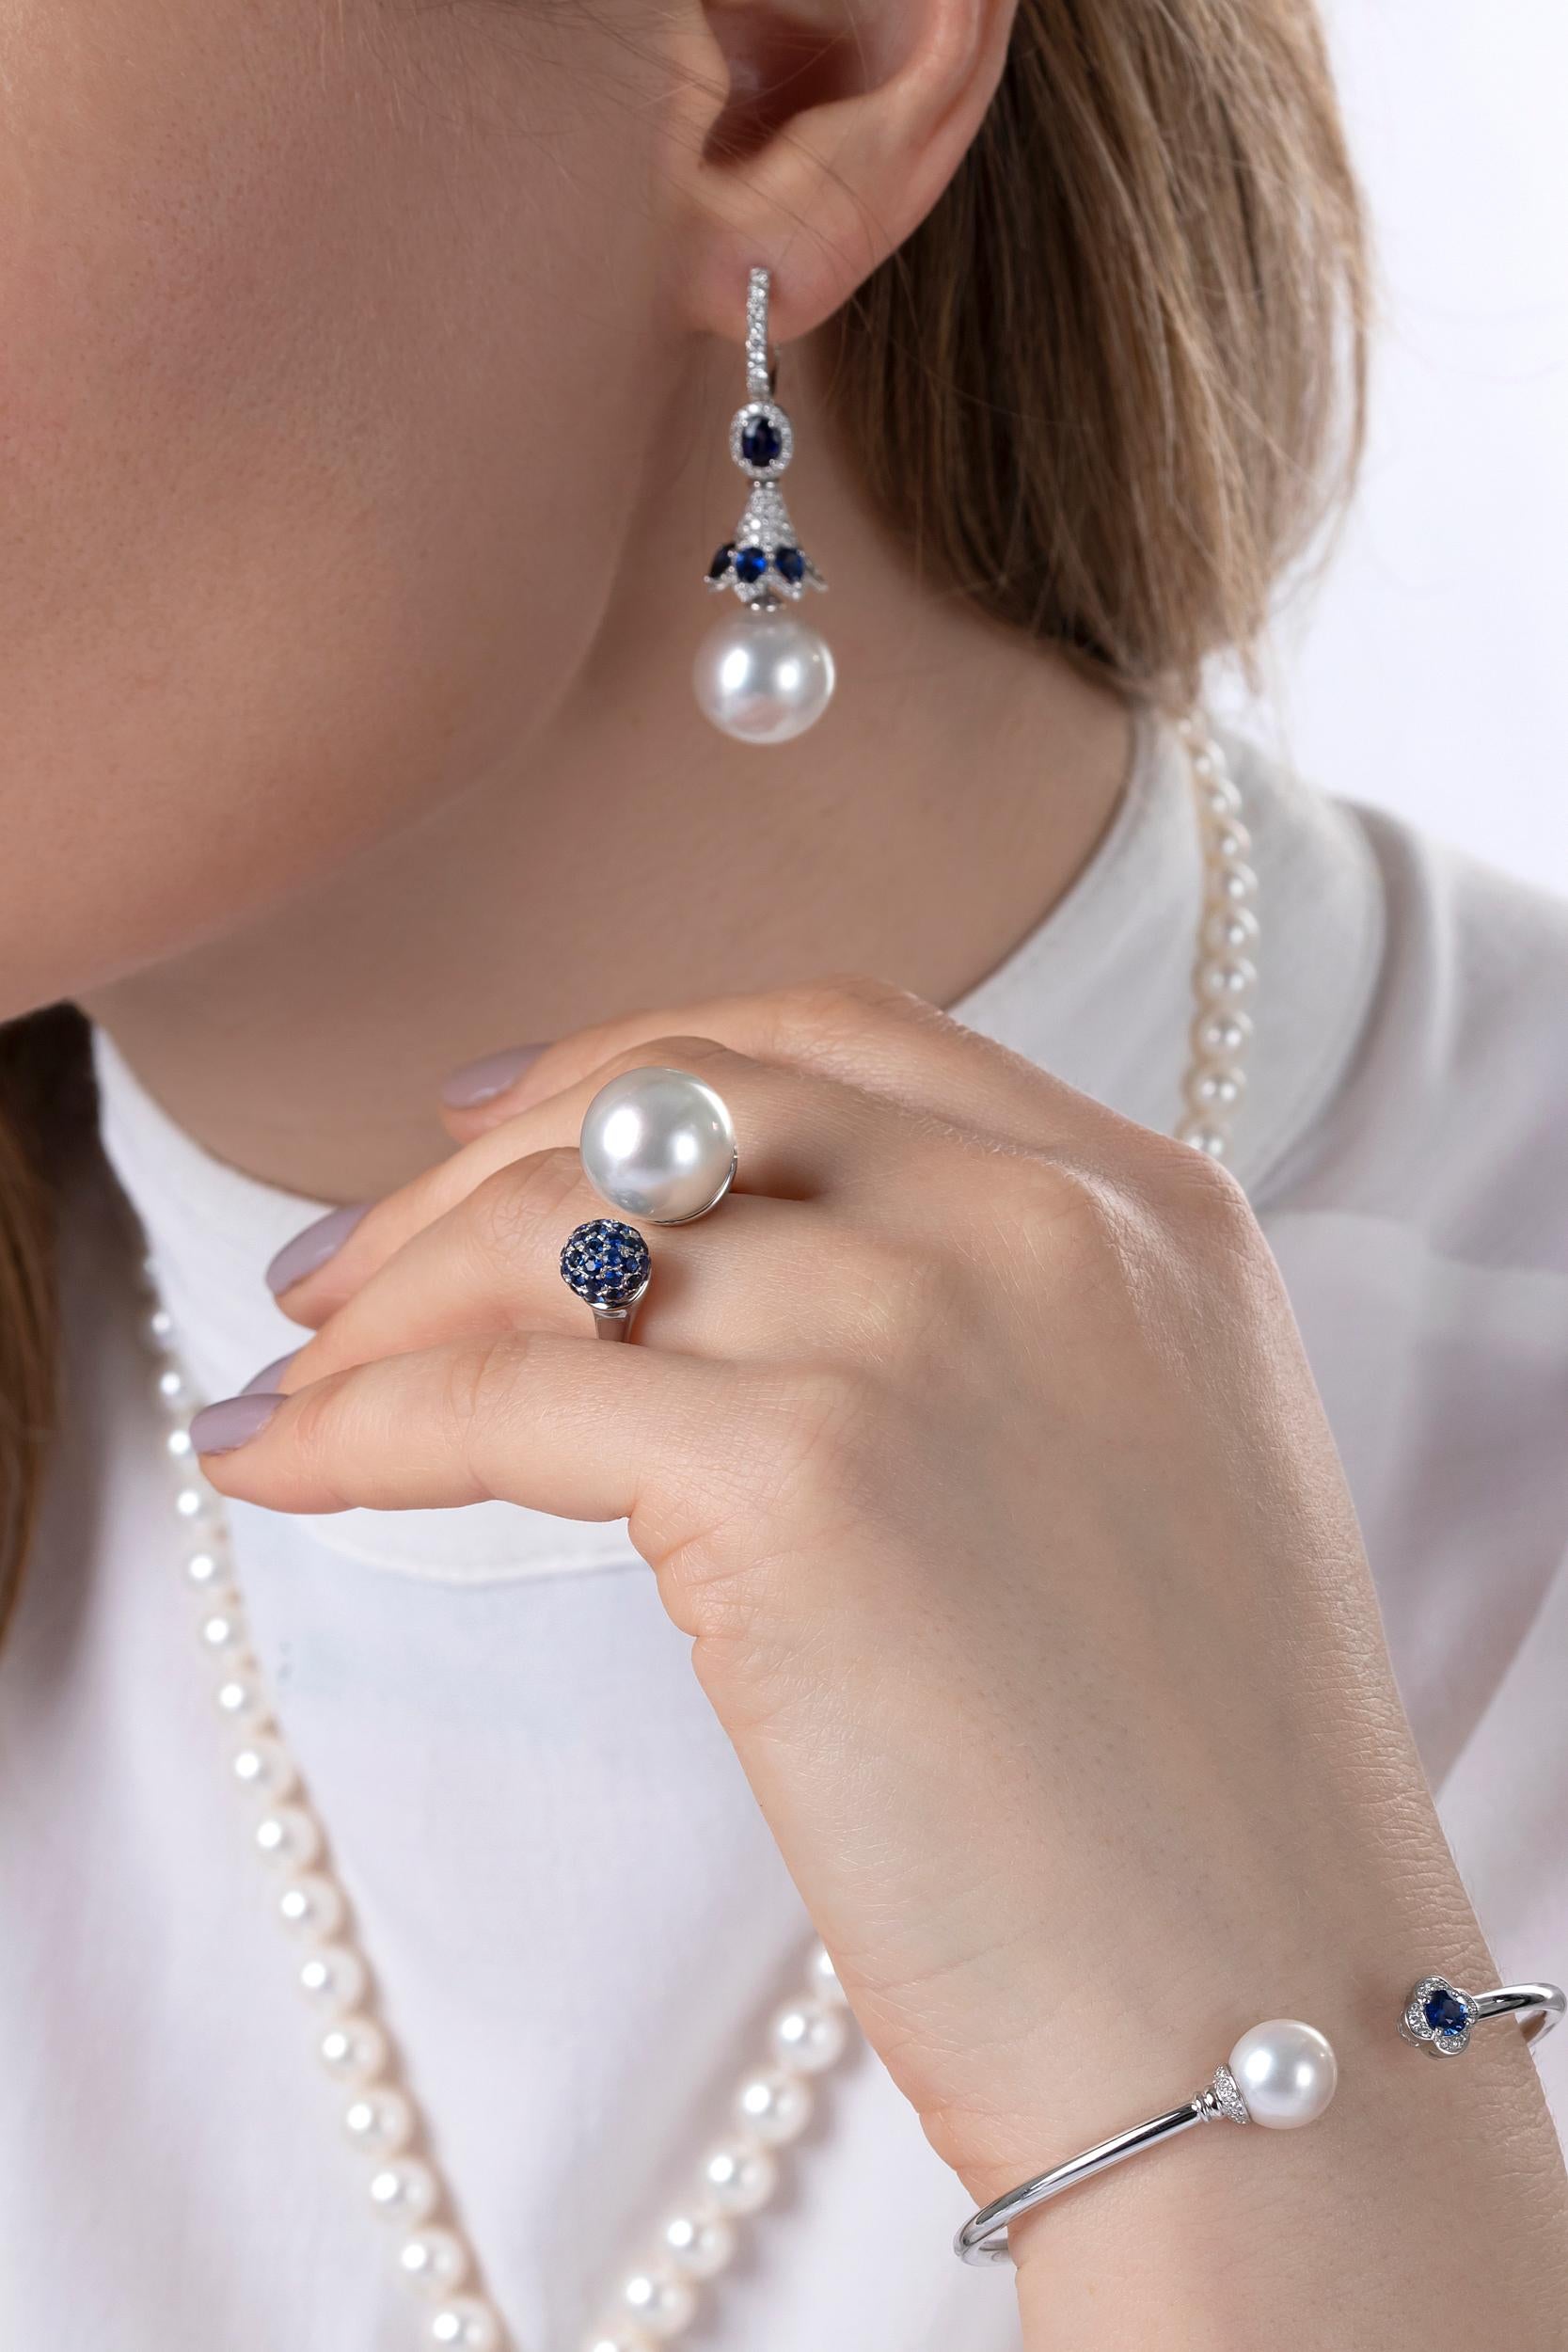 This enchanting ring is part of Yoko London's Belgravia collection which celebrates classic precious gems. Combining a contemporary design with a timeless pairing of pearls and sapphires, this unique ring blends the modern with the classic